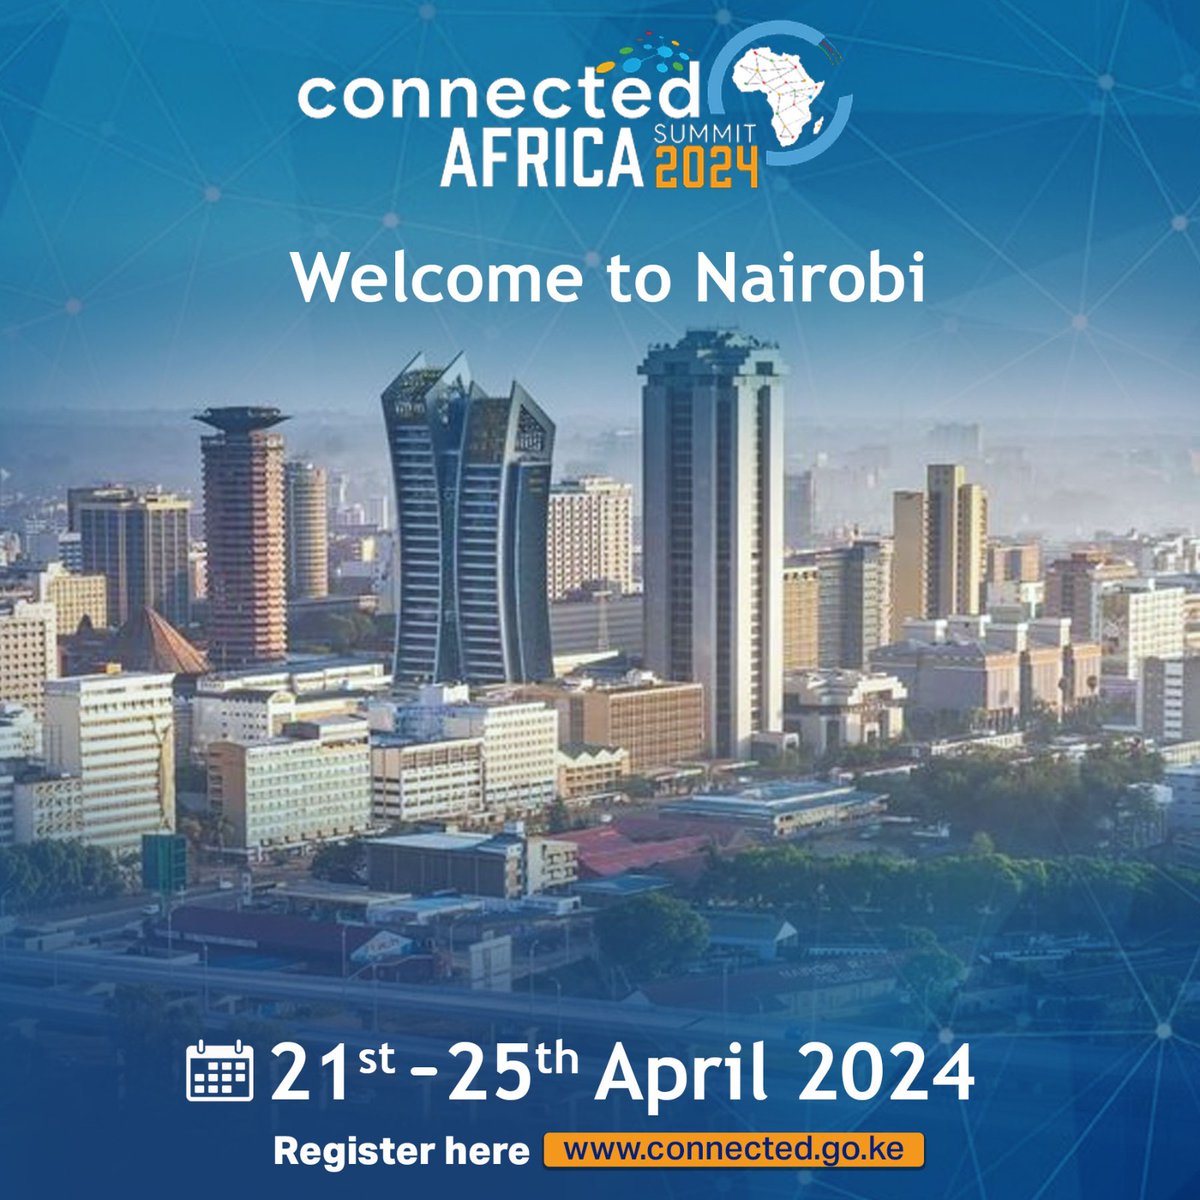 Explore Nairobi's magic at #ConnectedAfricaSummit2024, exchange ideas, forge partnerships, and explore new digital opportunities in Africa. Register: connected.go.ke